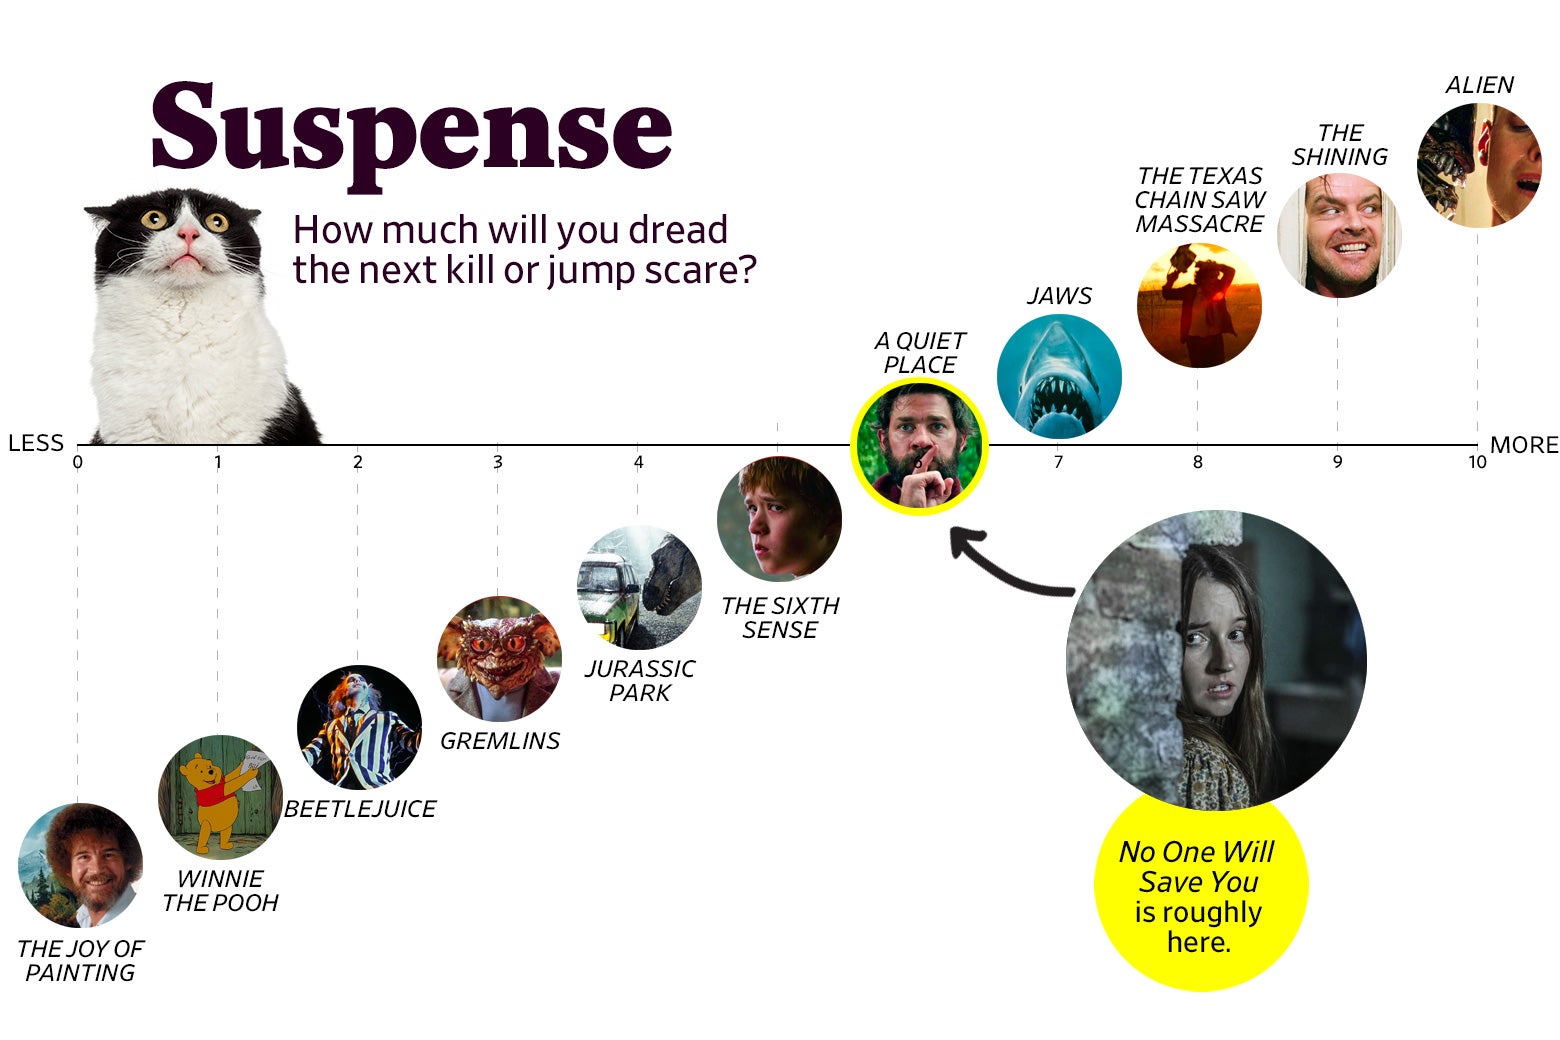 A chart titled “Suspense: How much will you dread the next kill or jump scare?” shows that No One Will Save You ranks a 6 in suspense, roughly the same as A Quiet Place.  The scale ranges from The Joy of Painting (0) to Alien (10).